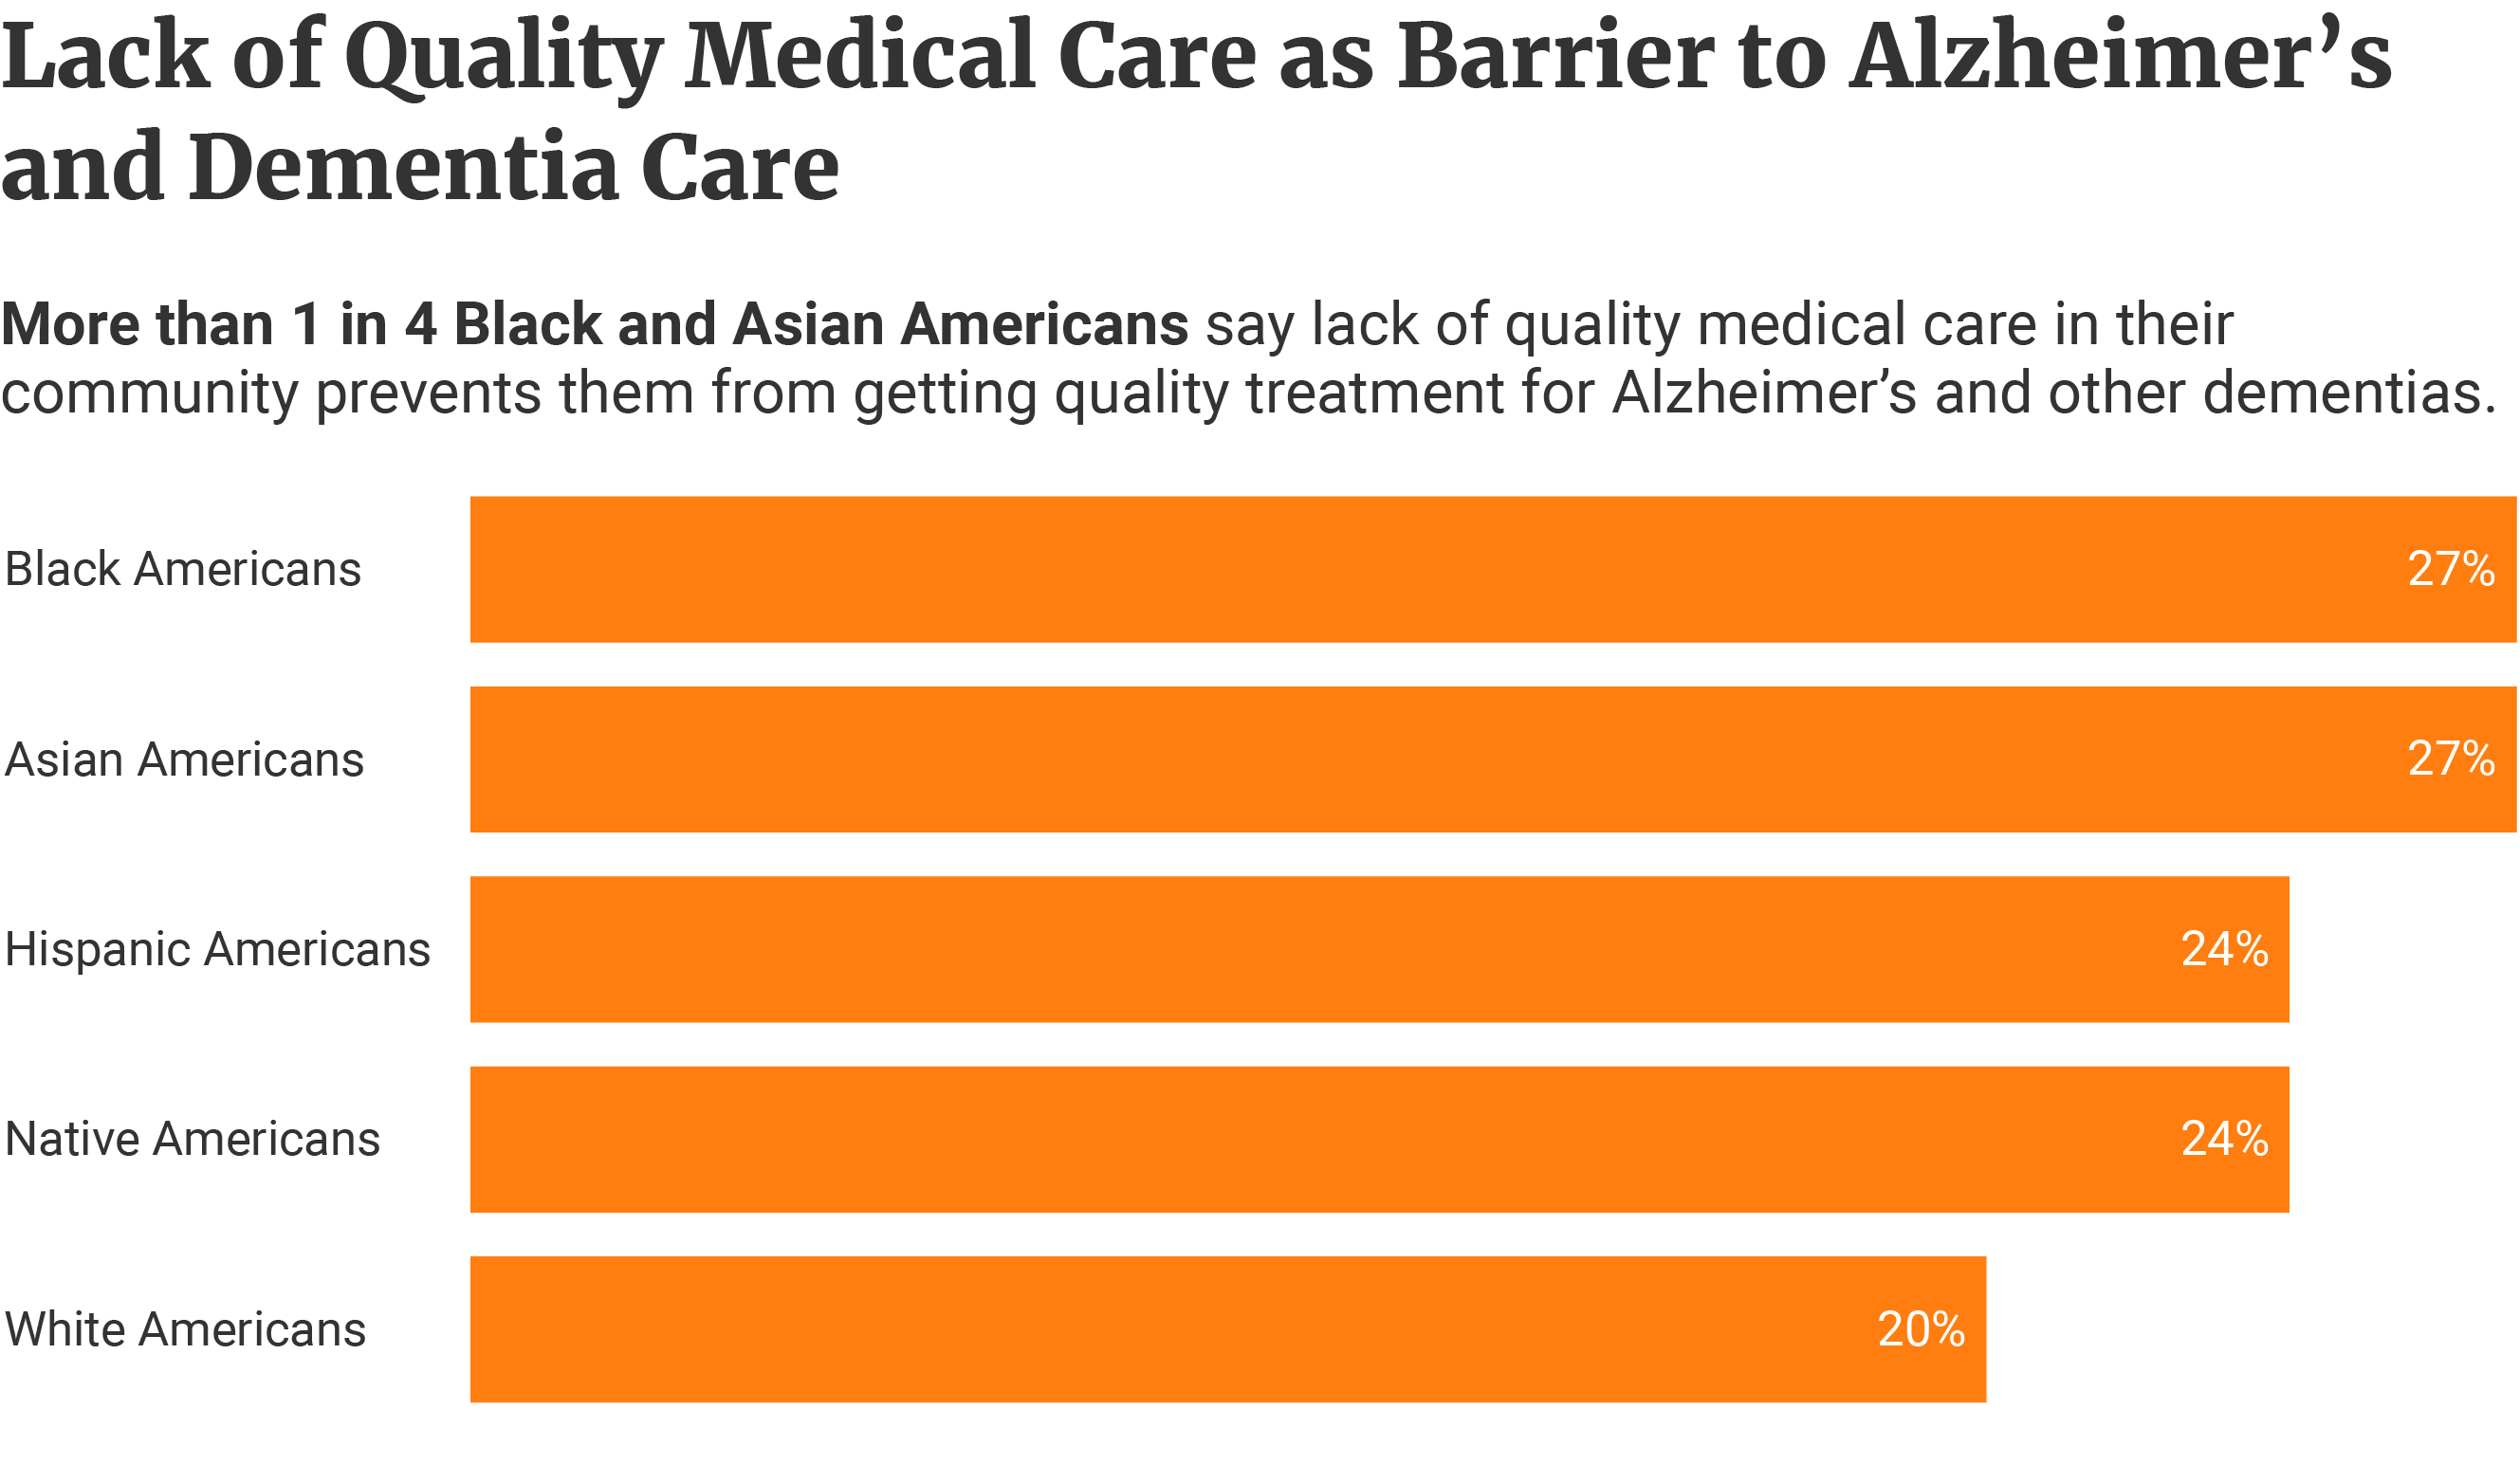 Horizontal bars showing more Blacks and Asians think lack of quality medical care is a barrier at 27% as well as Hispanics and Natives at 24% than Whites at 20%.